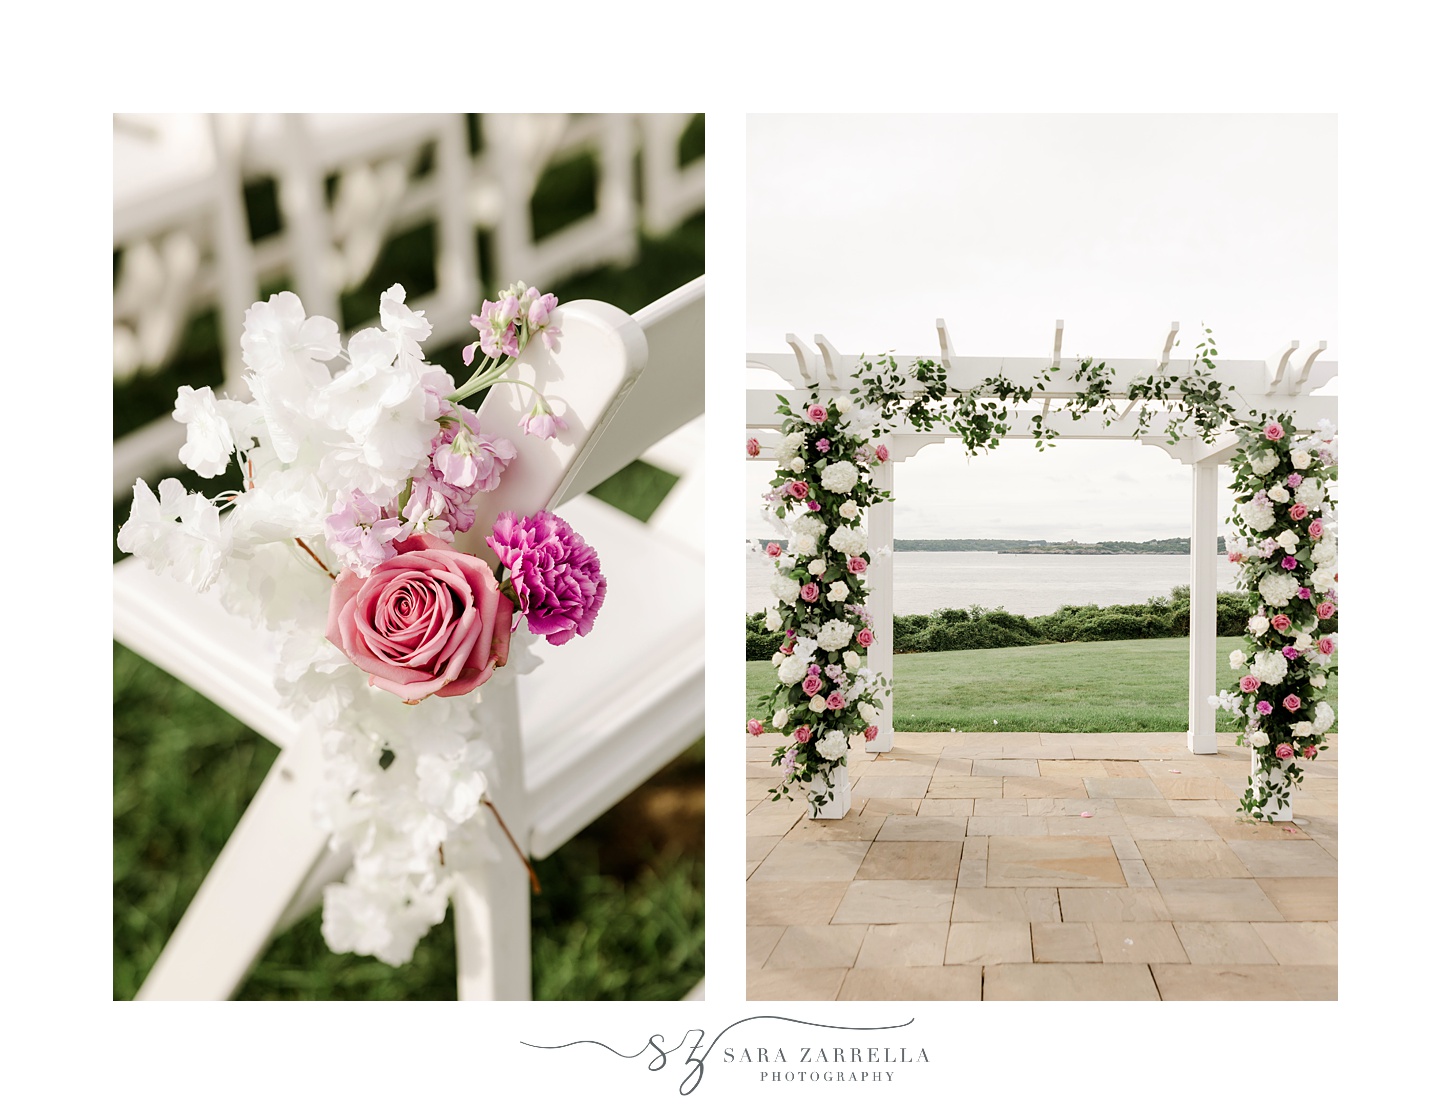 wedding ceremony on lawn at OceanCliff Hotel with pink and white flowers on arbor and chairs 